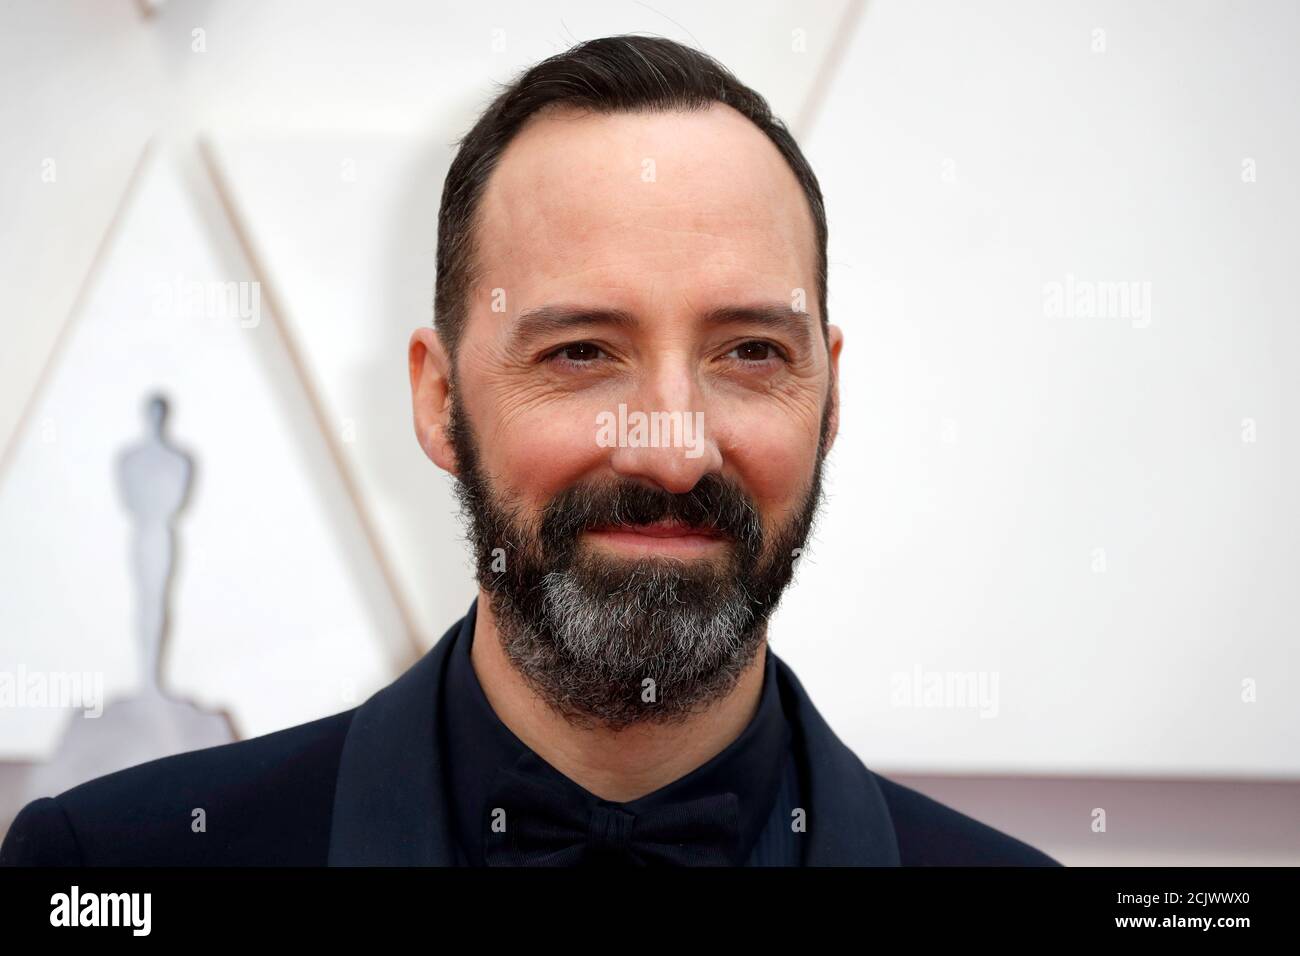 Tony Hale poses on the red carpet during the Oscars arrivals at the 92nd Academy Awards in Hollywood, Los Angeles, California, U.S., February 9, 2020. REUTERS/Eric Gaillard Stock Photo